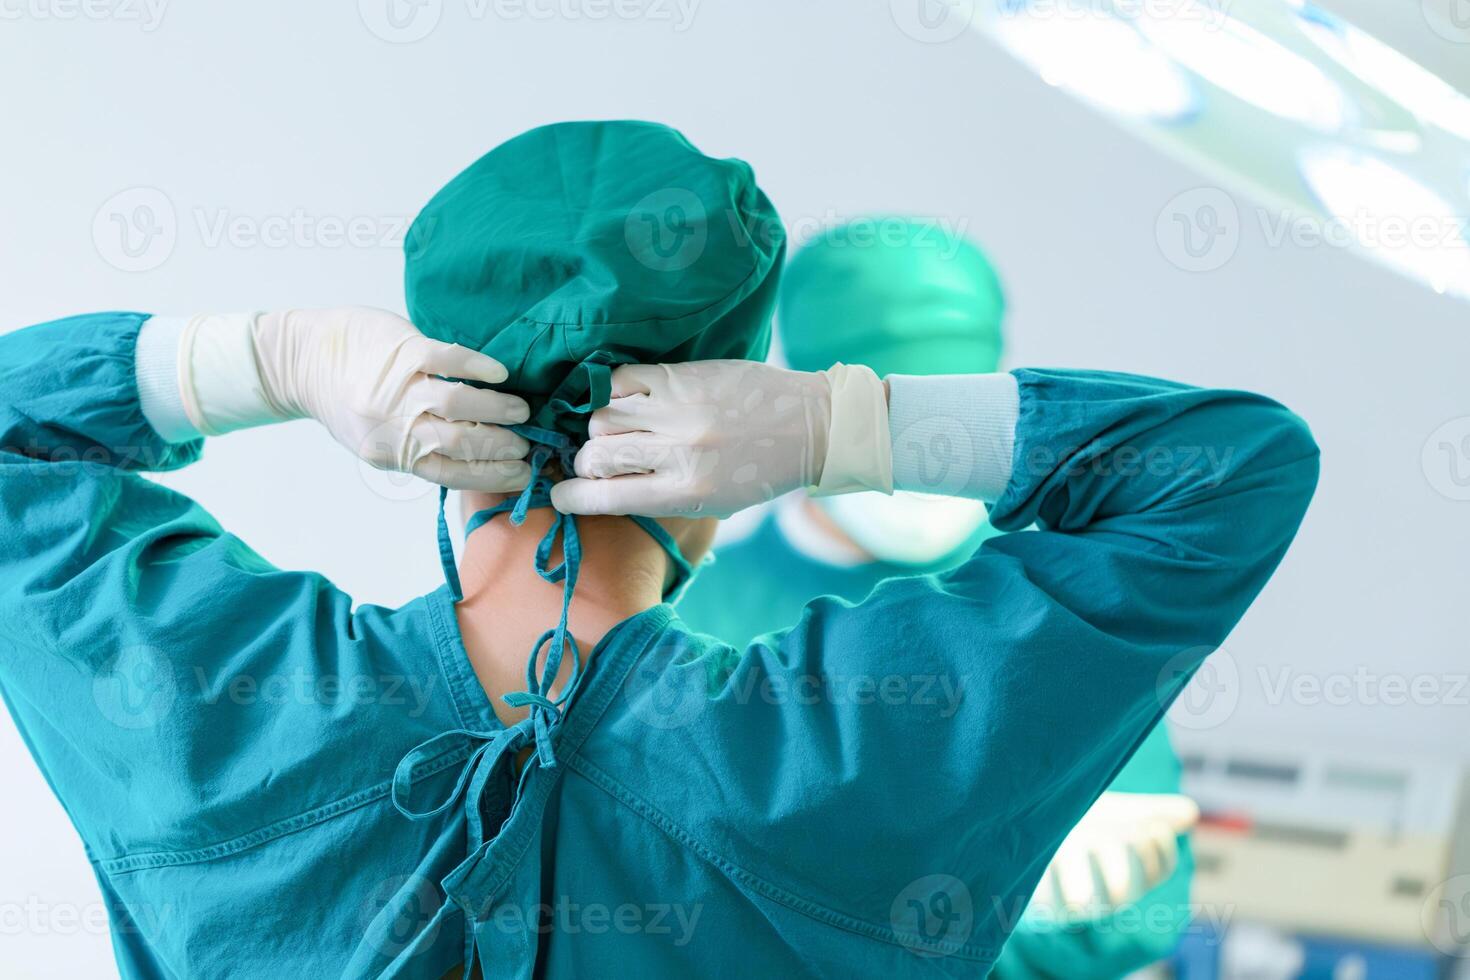 Back view of surgeon tying surgical cap in preparation, Medical team performing surgical operation in operating room, Team surgeon at work in operating room photo